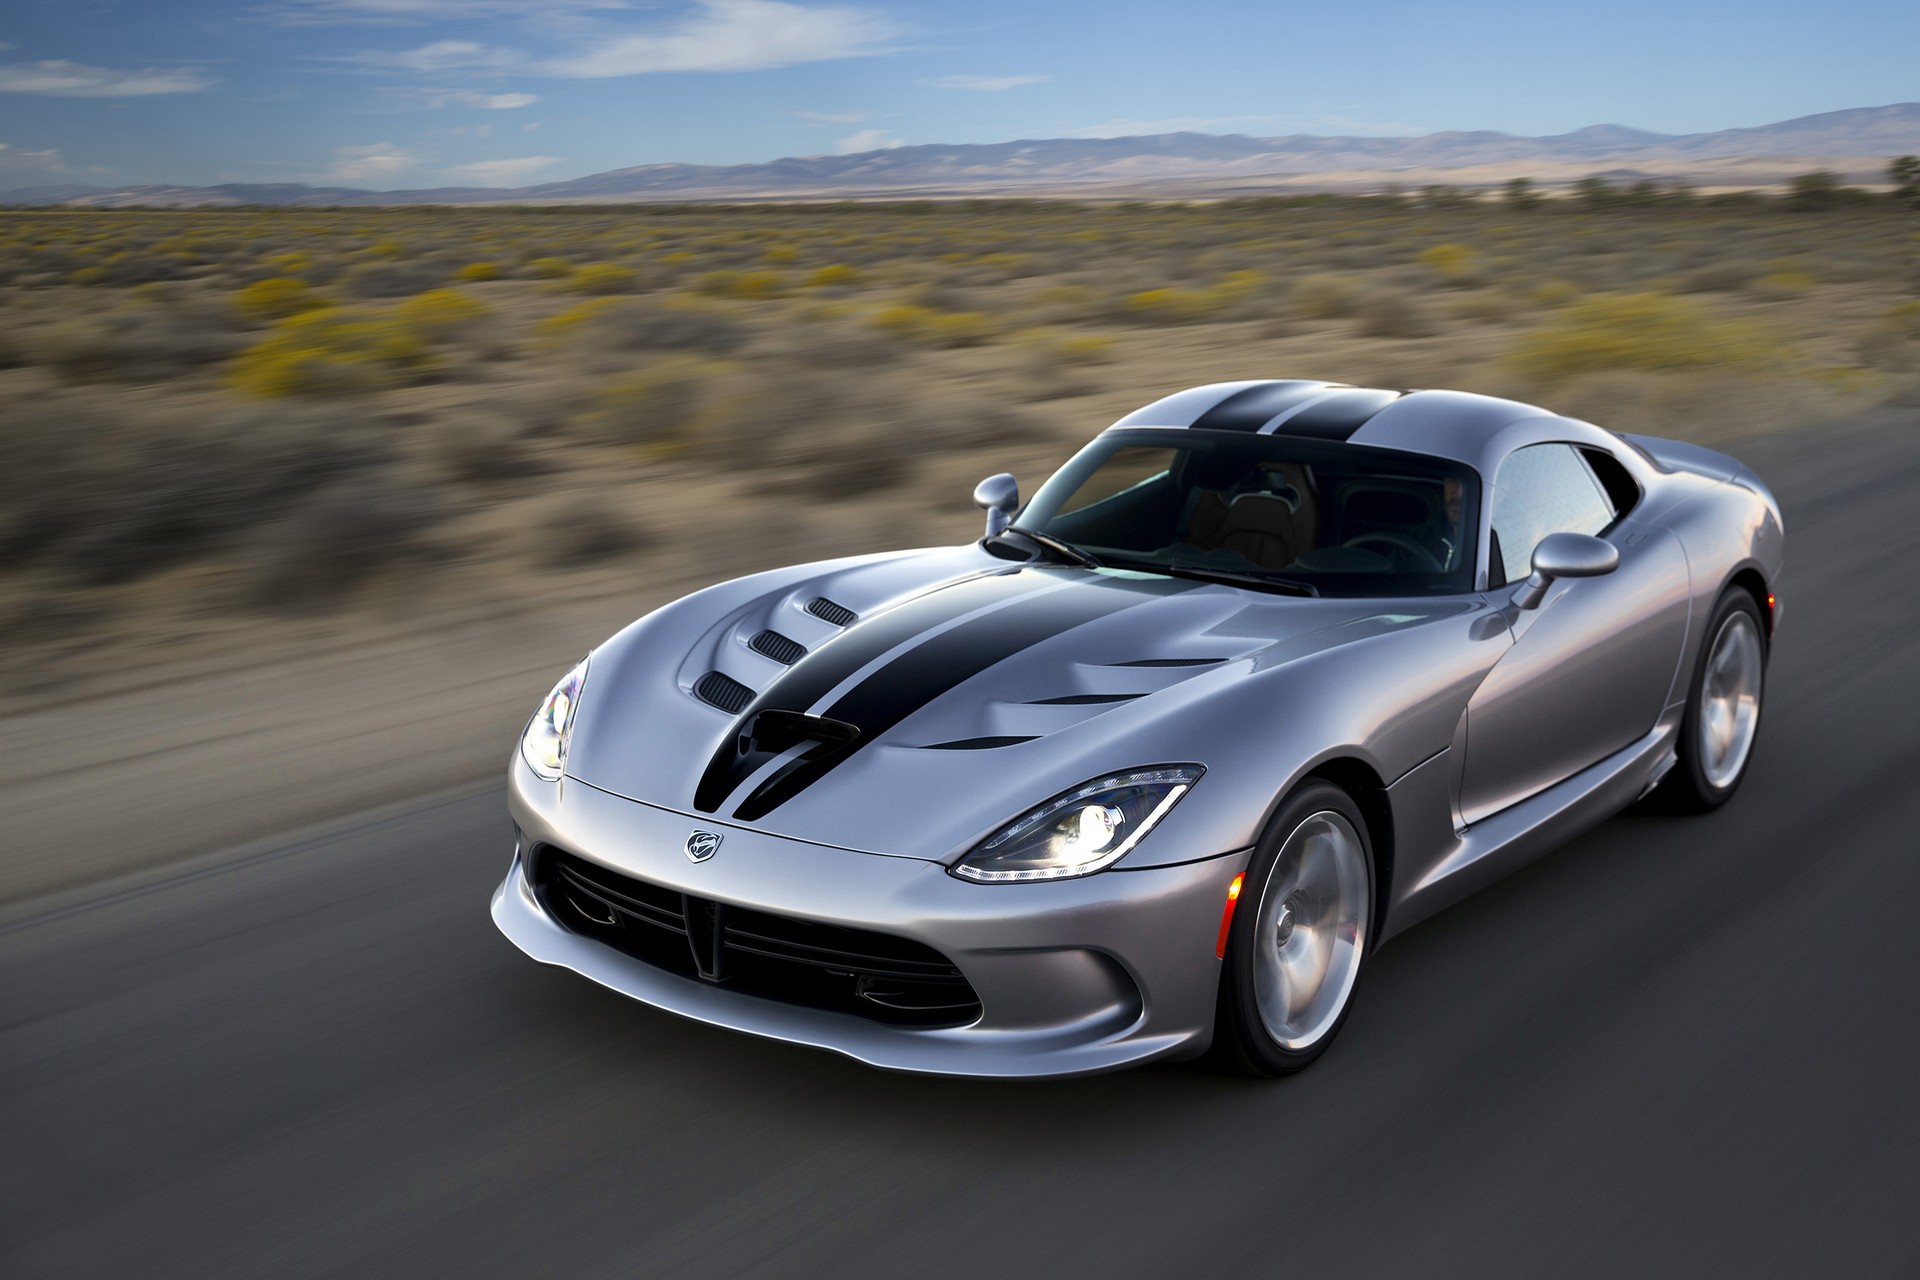 2015 Dodge Viper Srt Starting Price Dropped By 15000 Official